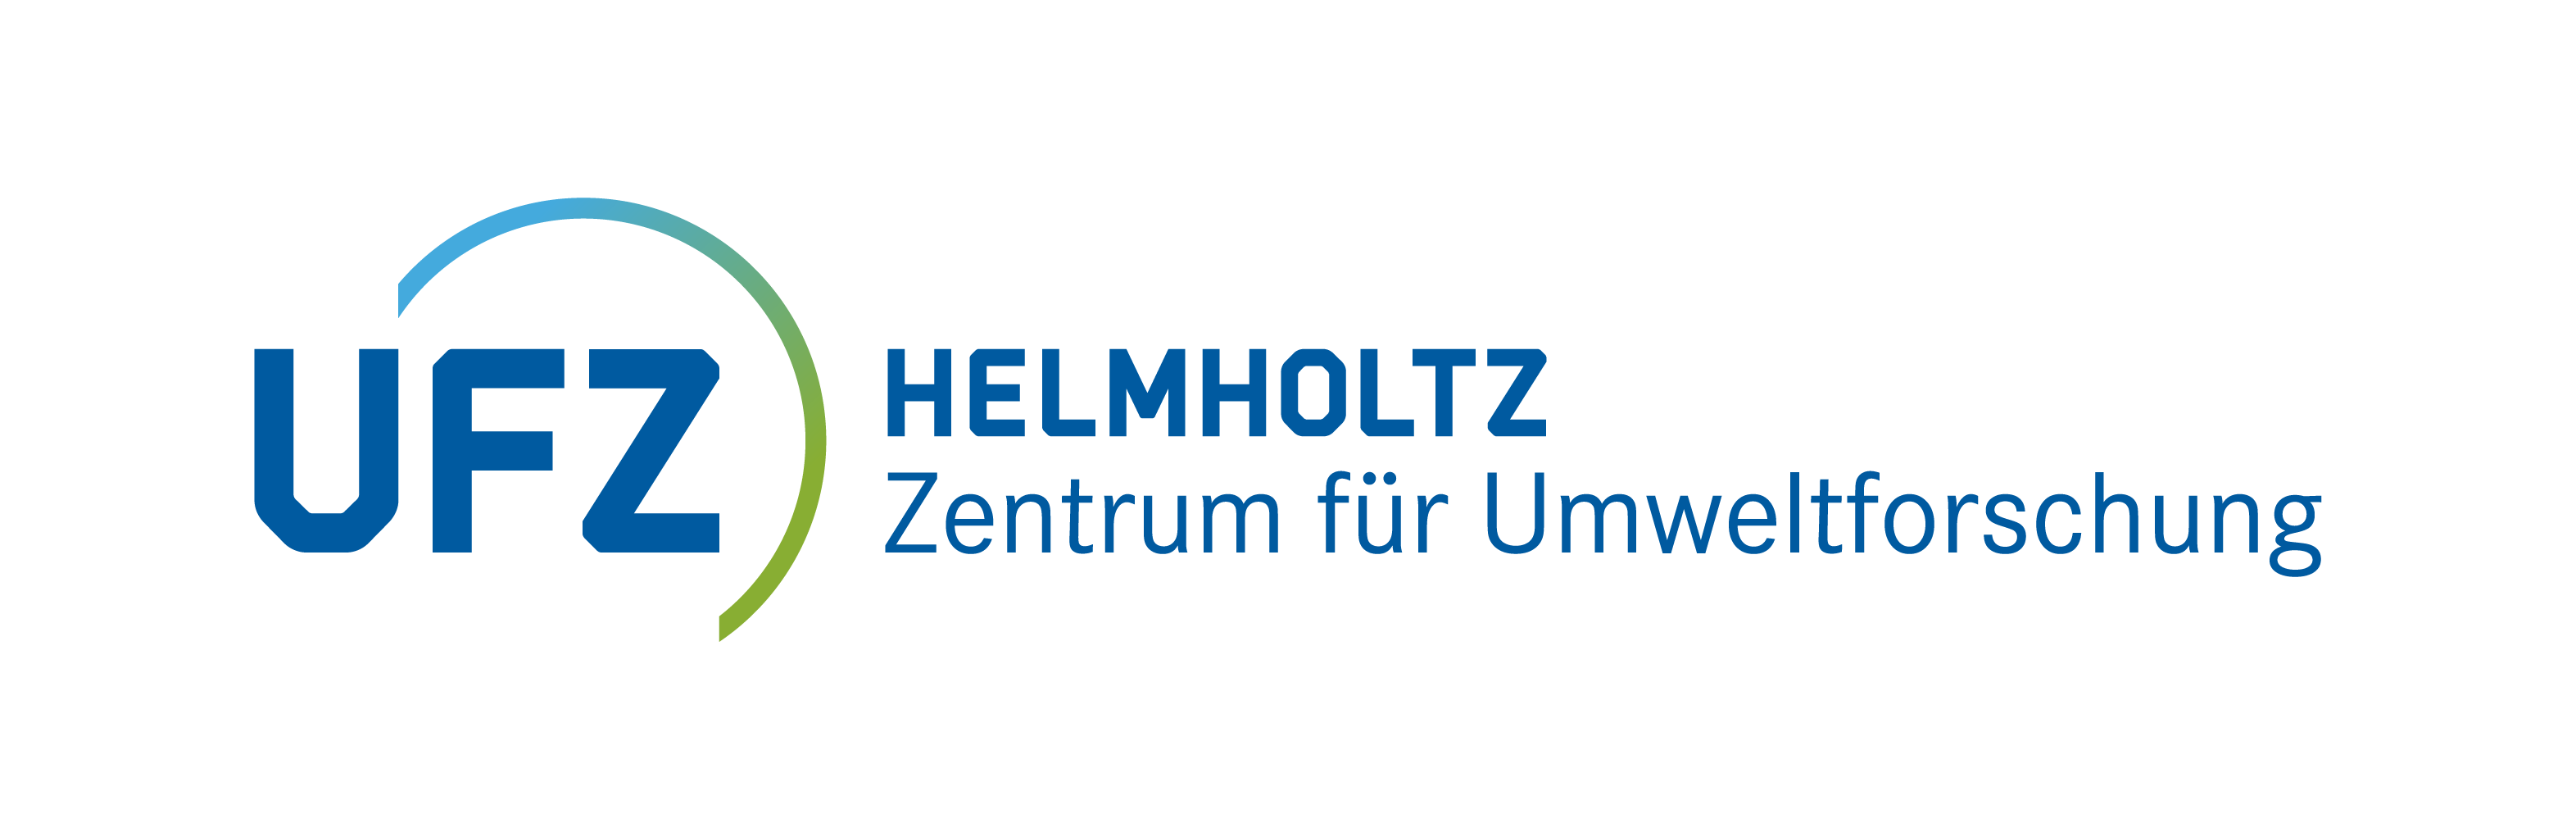 UFZ - Helmholtz Centre for Environmental Research